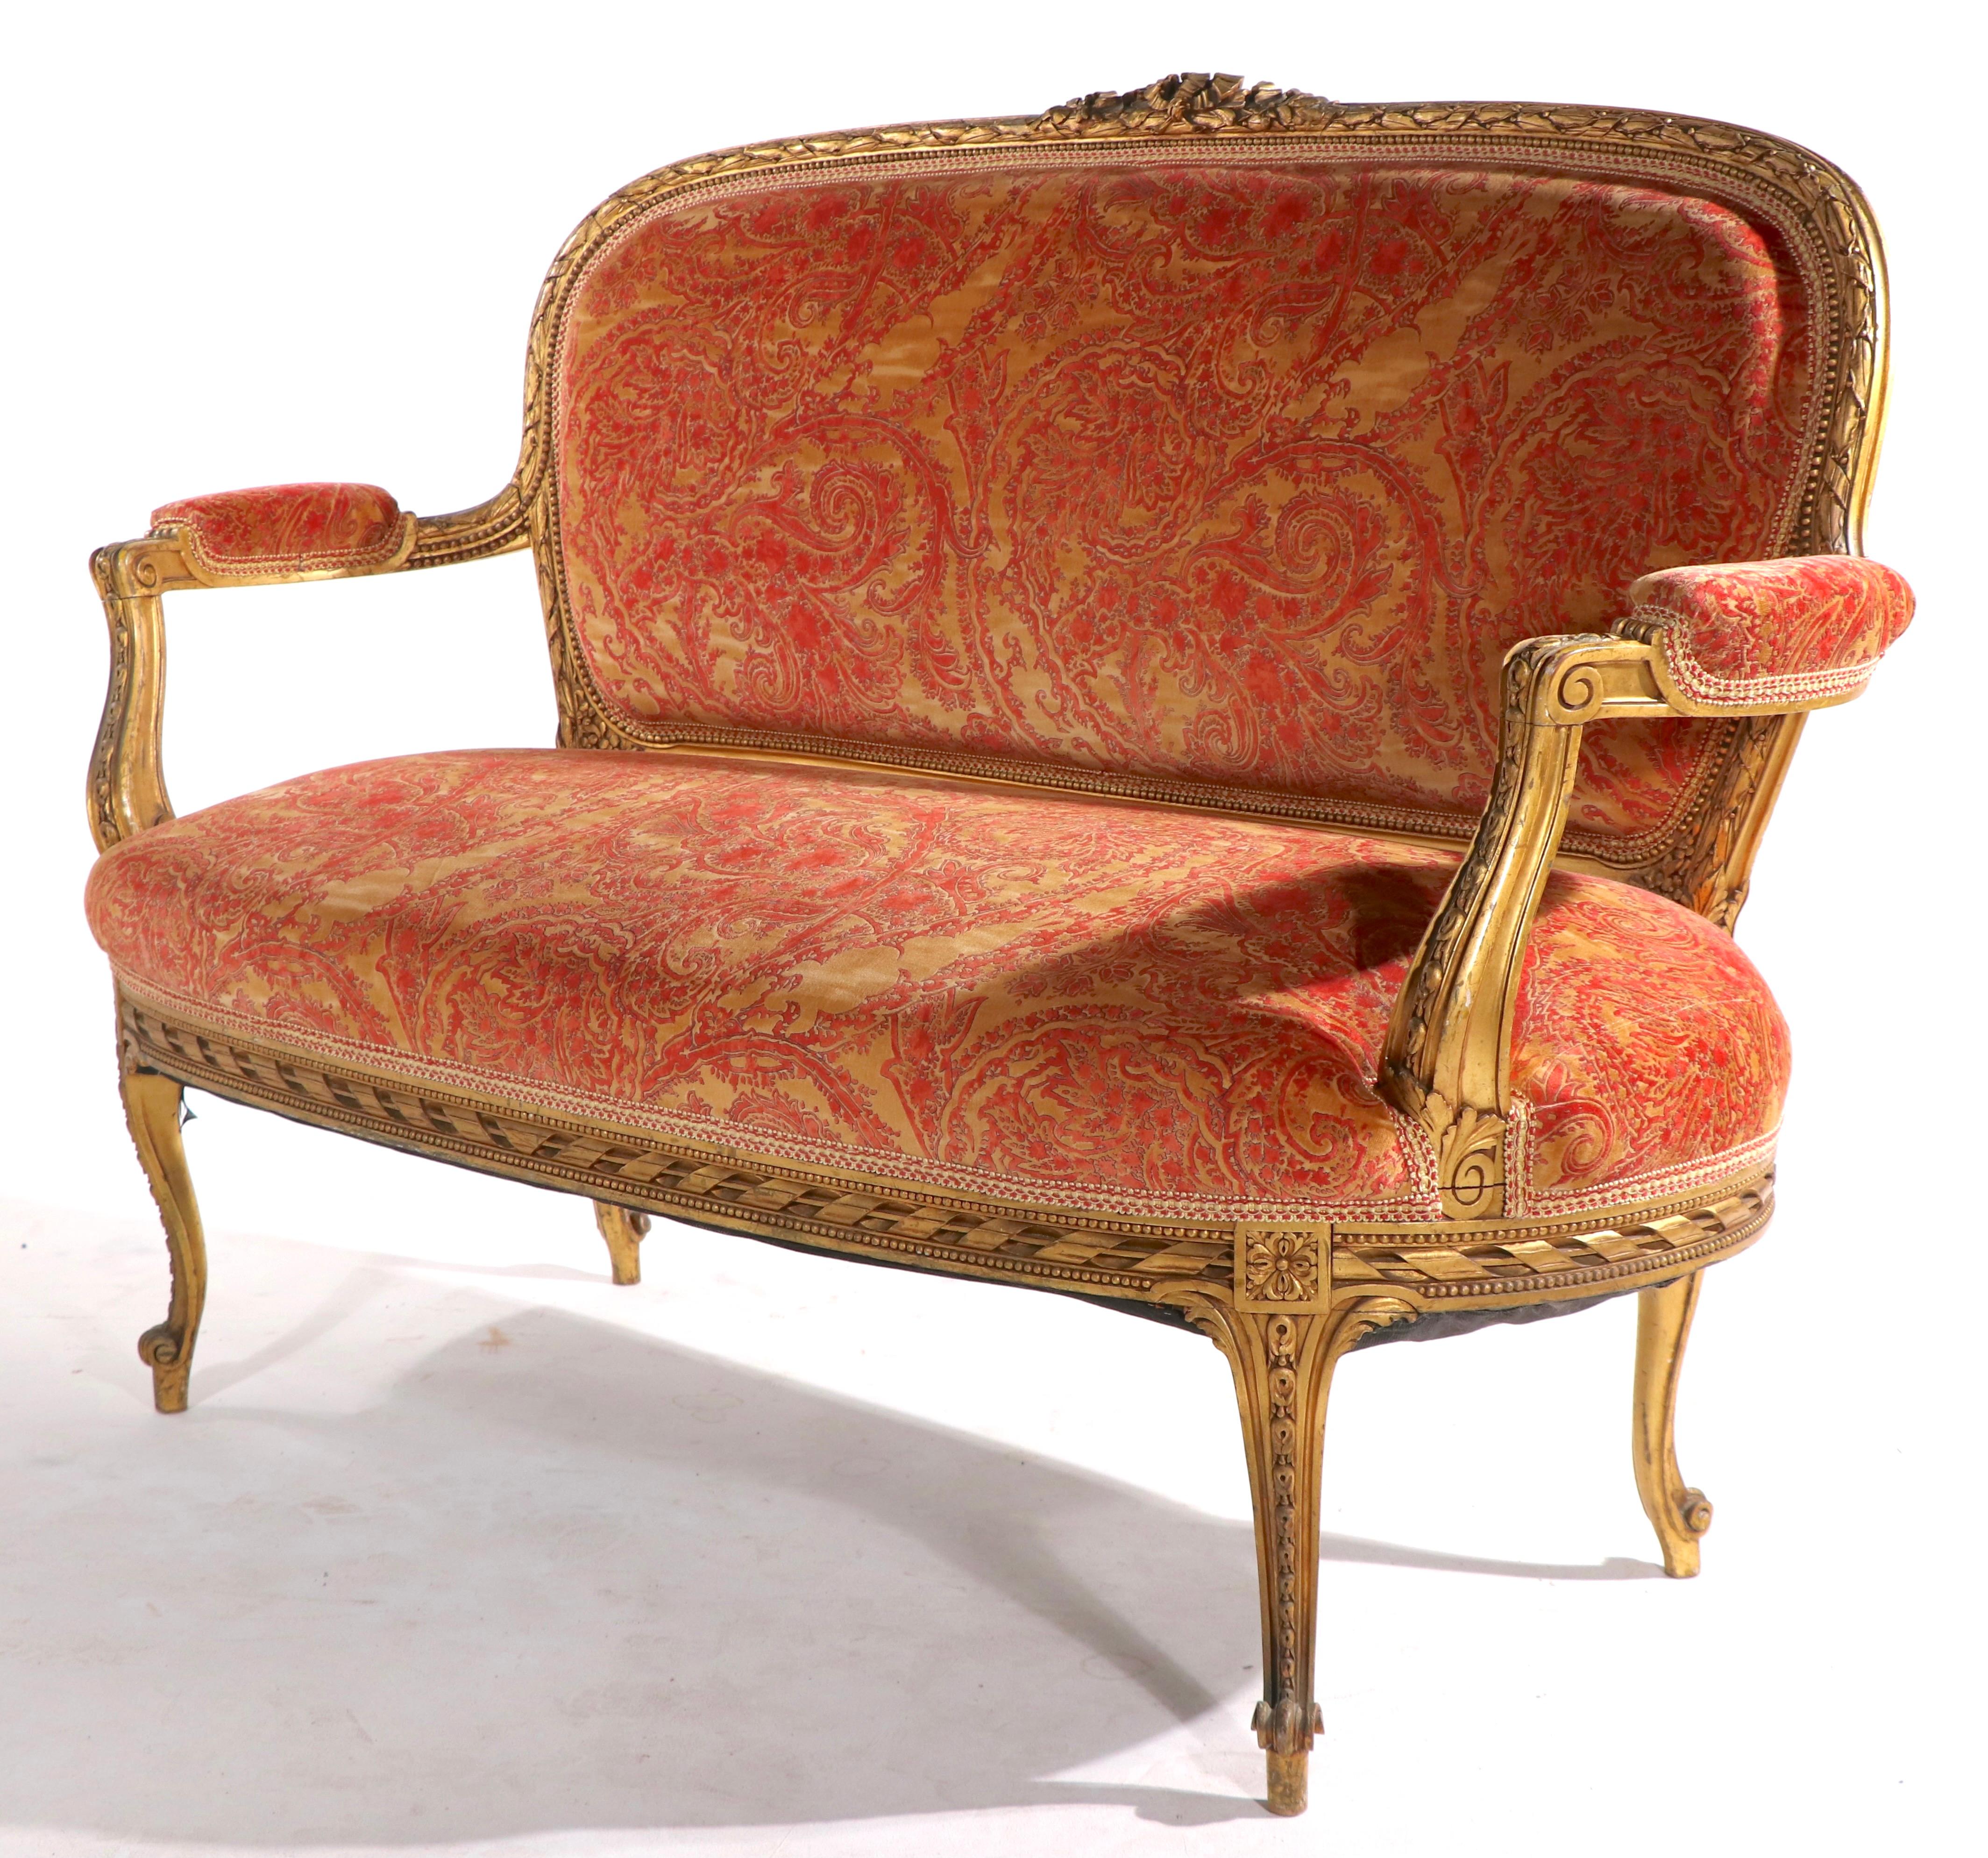 Louis XVI Gilt Settee Loveseat Sofa with Fortuny Fabric For Sale 7